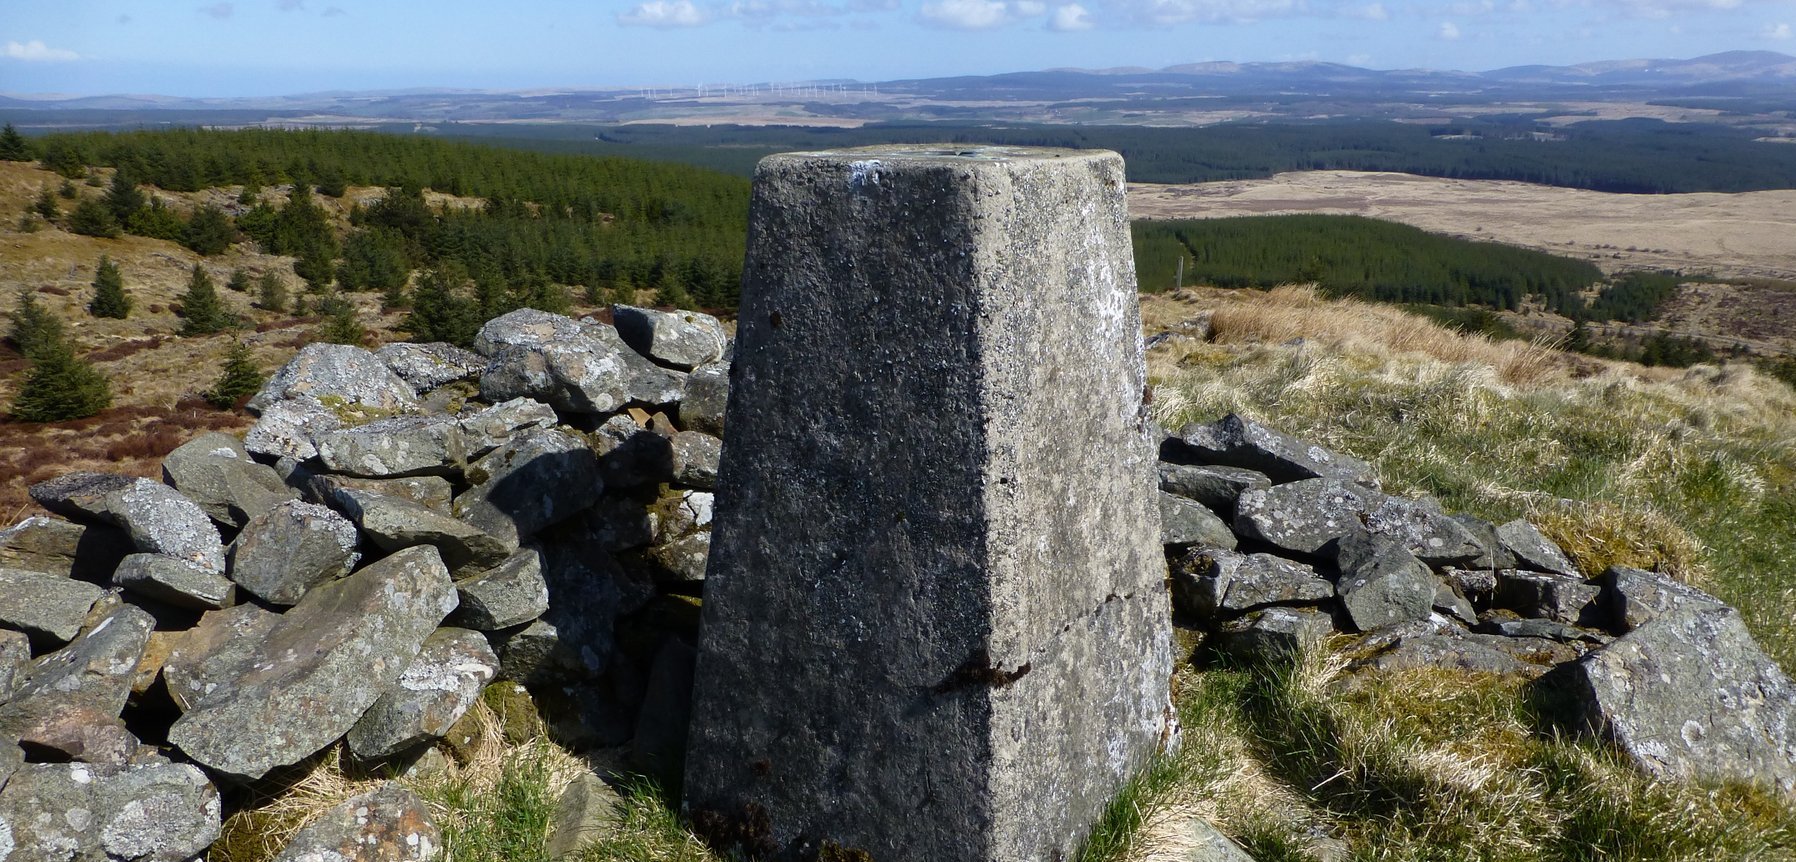 The summit and trig point of Craig Airie Fell